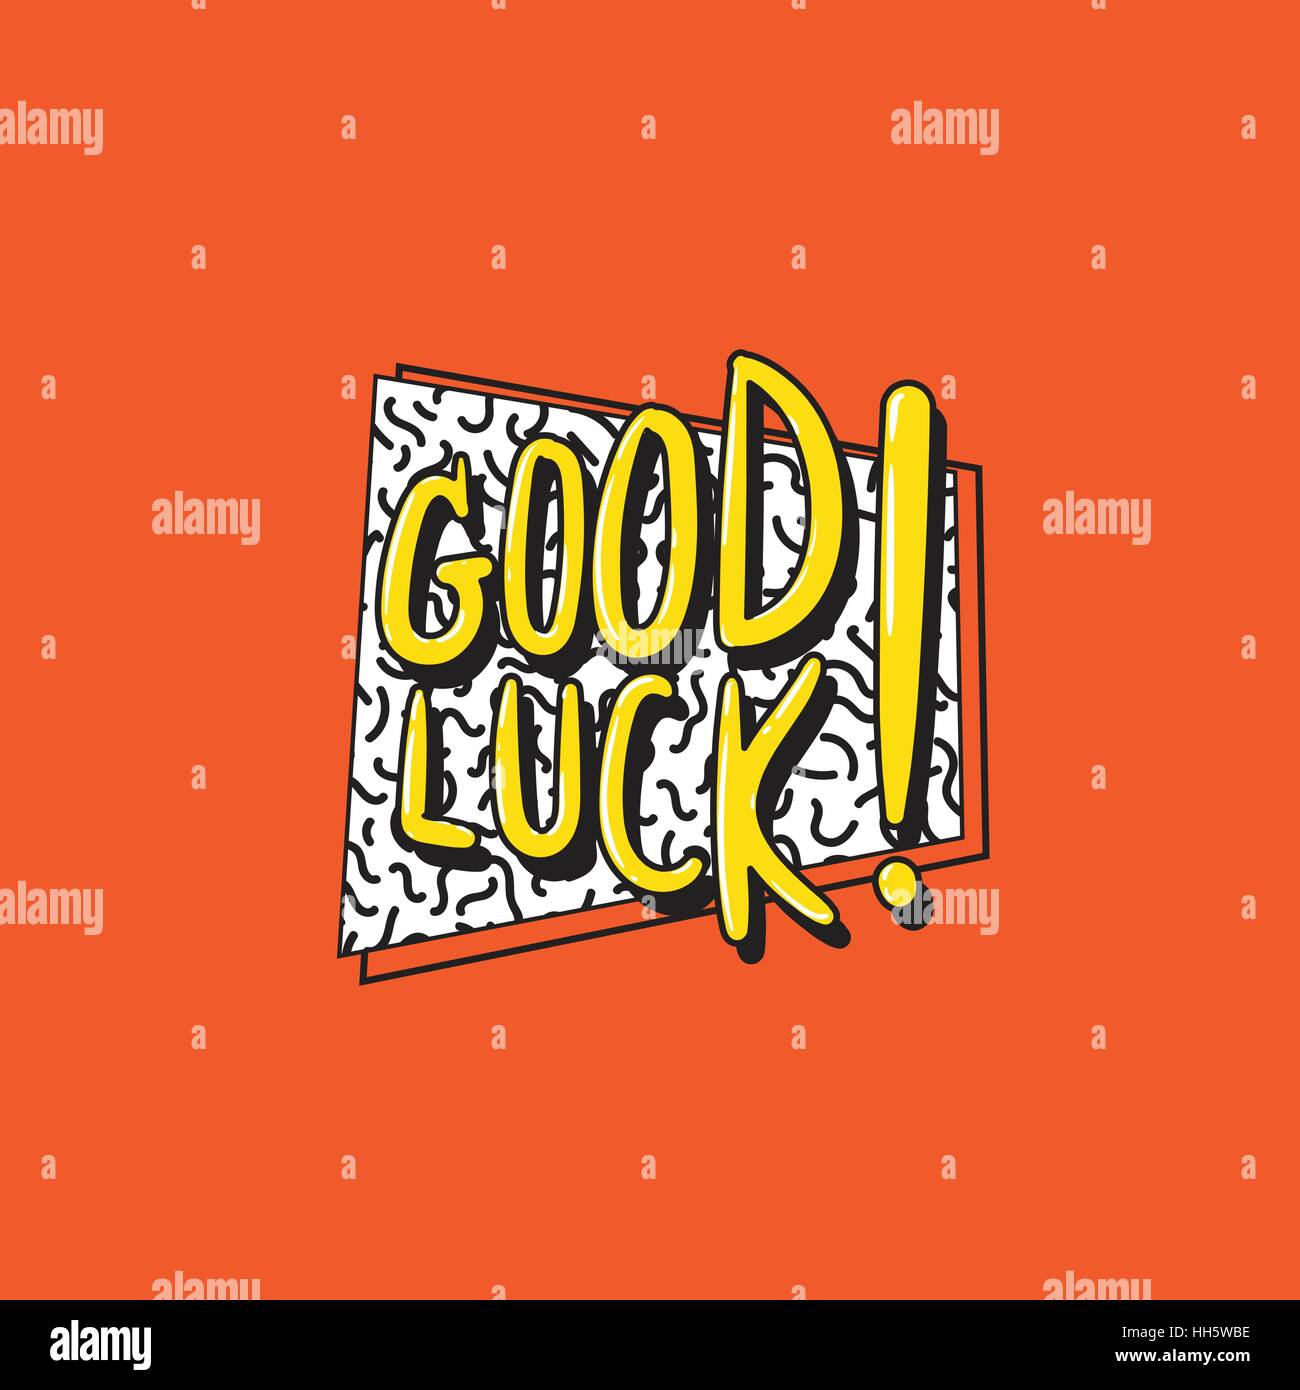 Good Luck Motivation Chance Support Concept Stock Vector